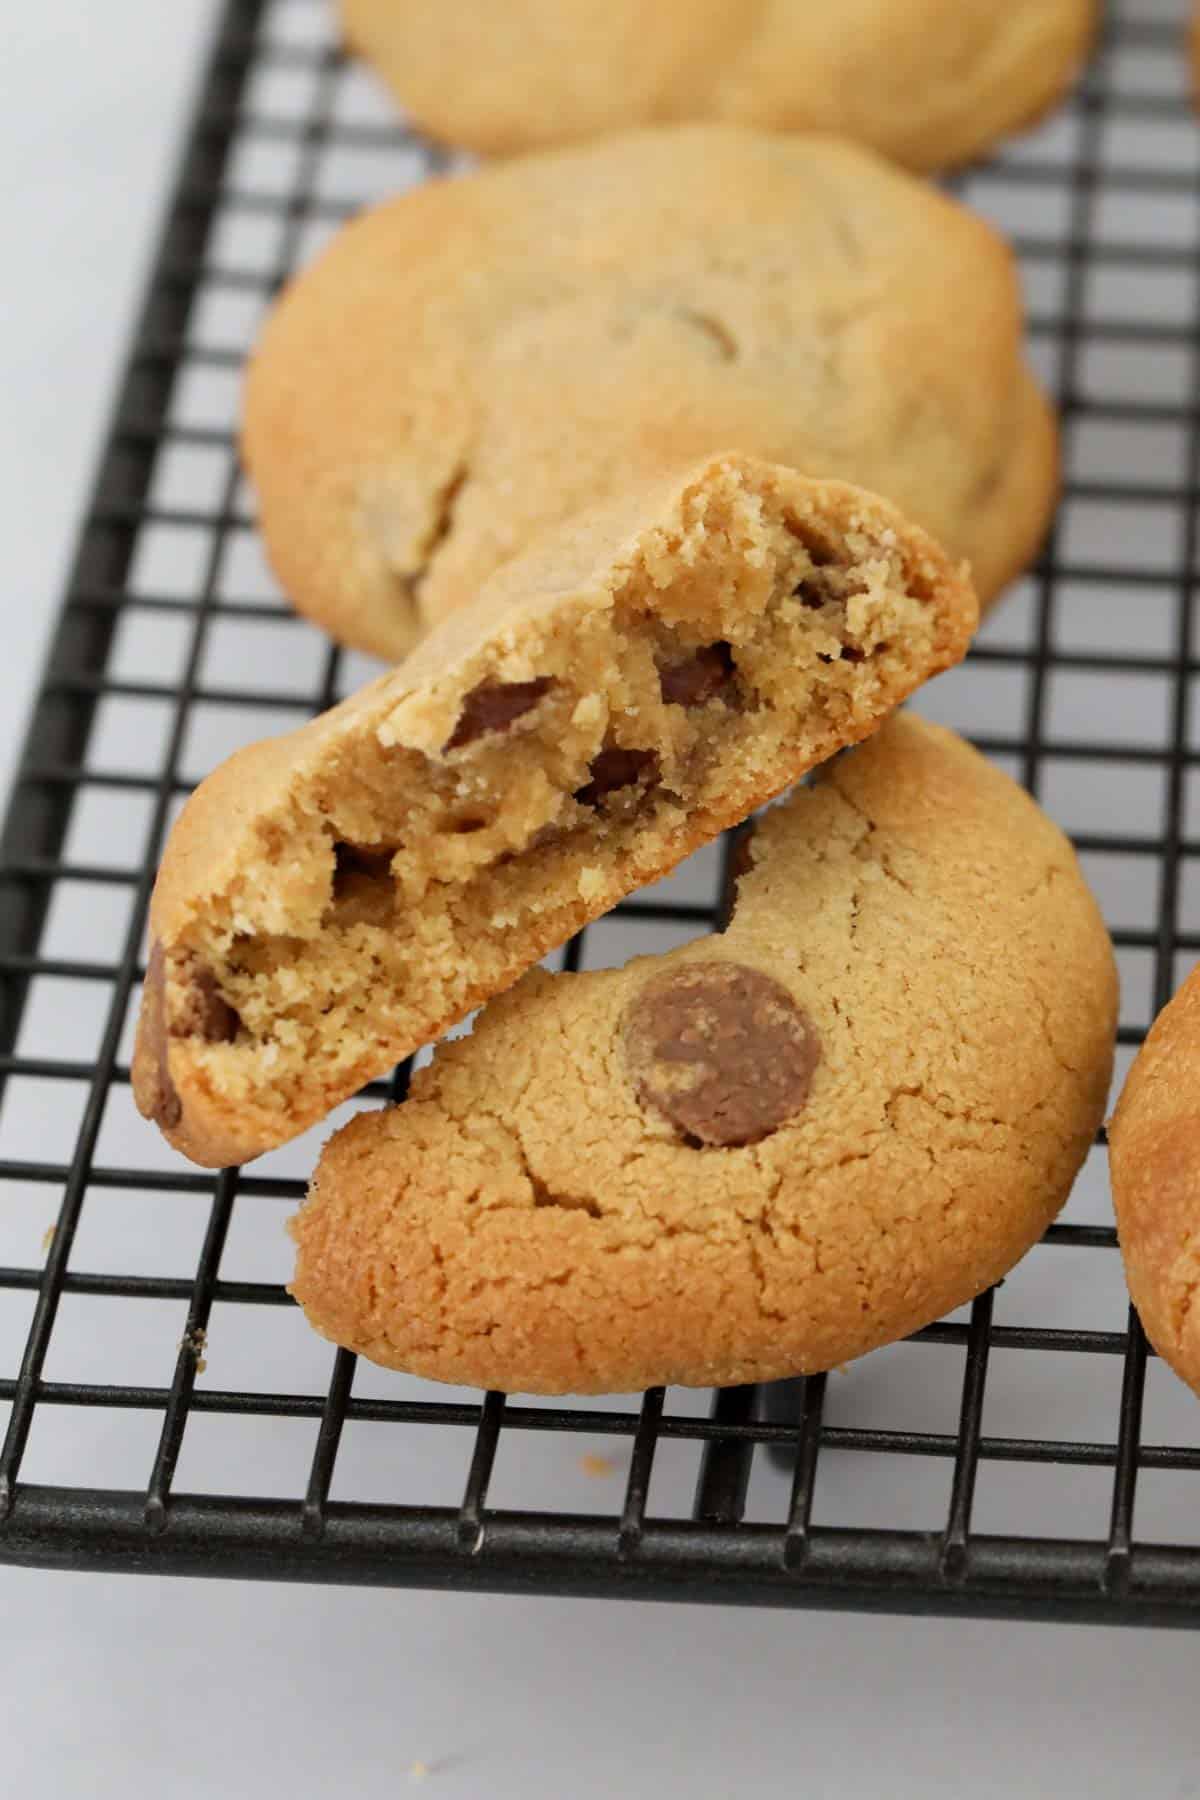 A peanut butter cookie broken in half to show the chocolate chips inside.